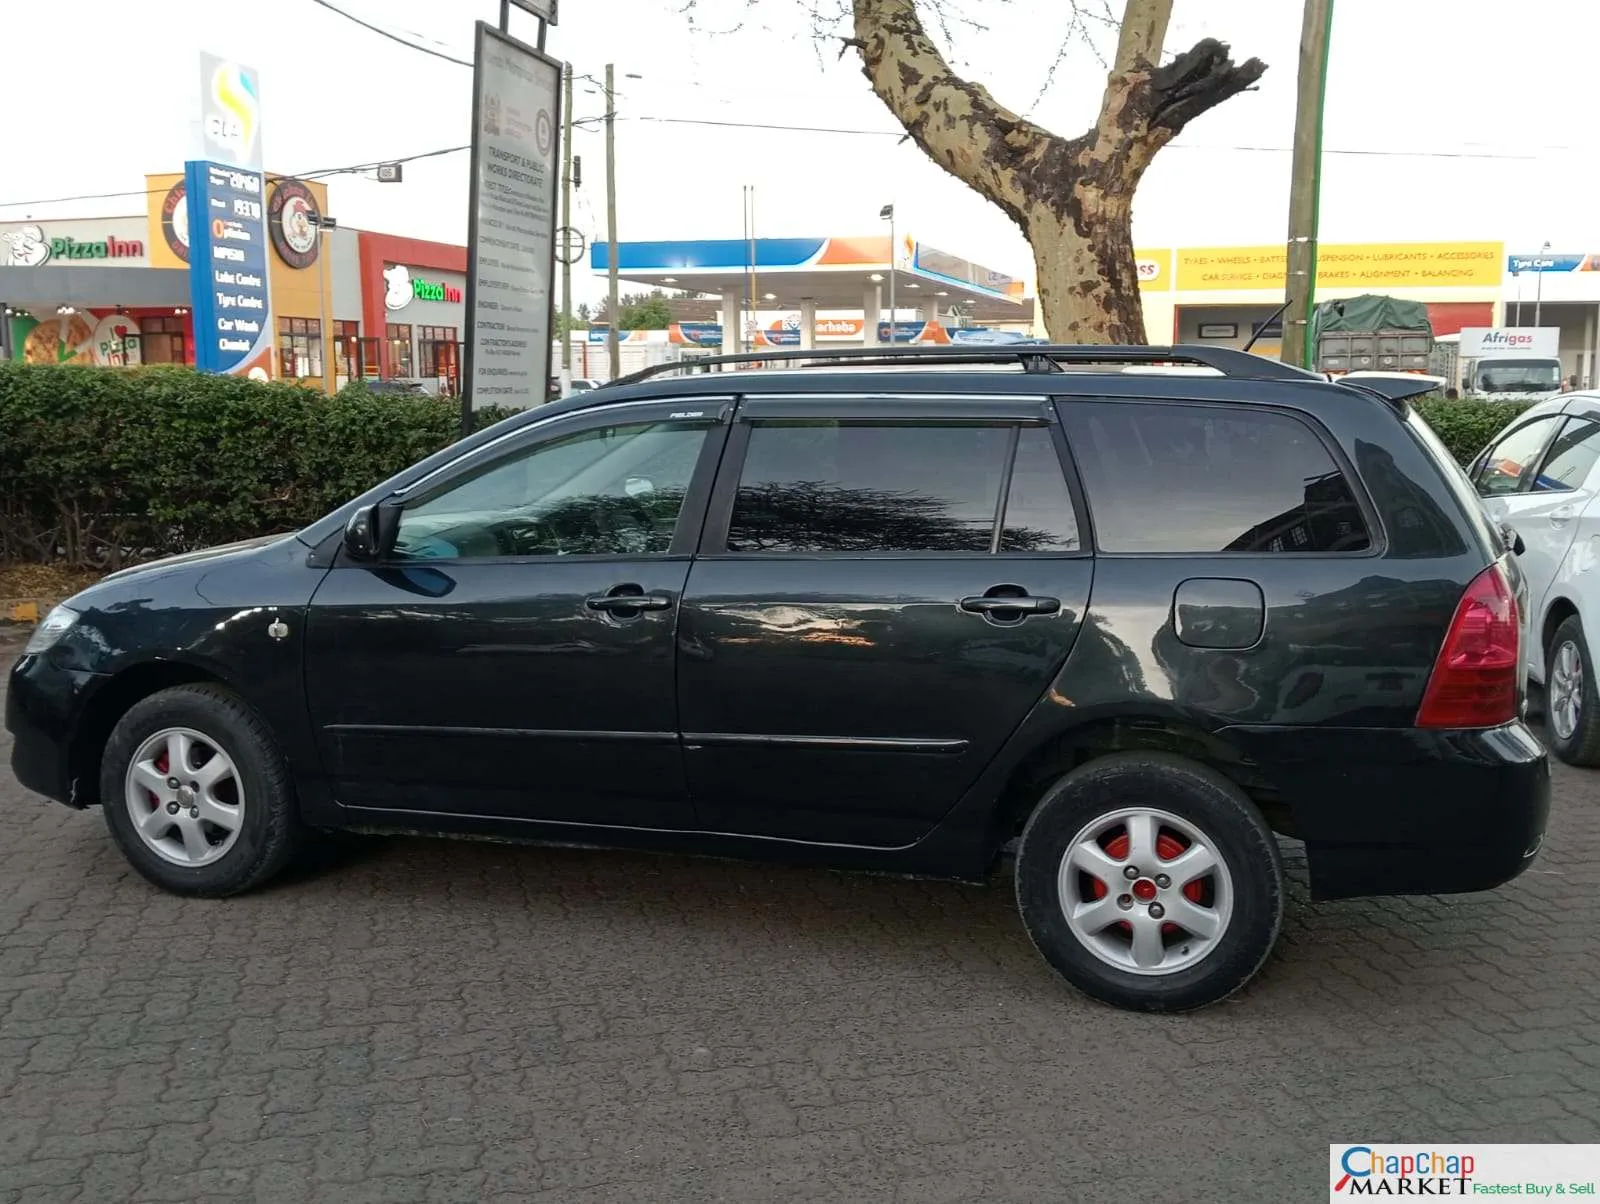 Toyota fielder mataa kwa boot QUICK SALE You Pay 30% Deposit Trade in OK new hire purchase installments